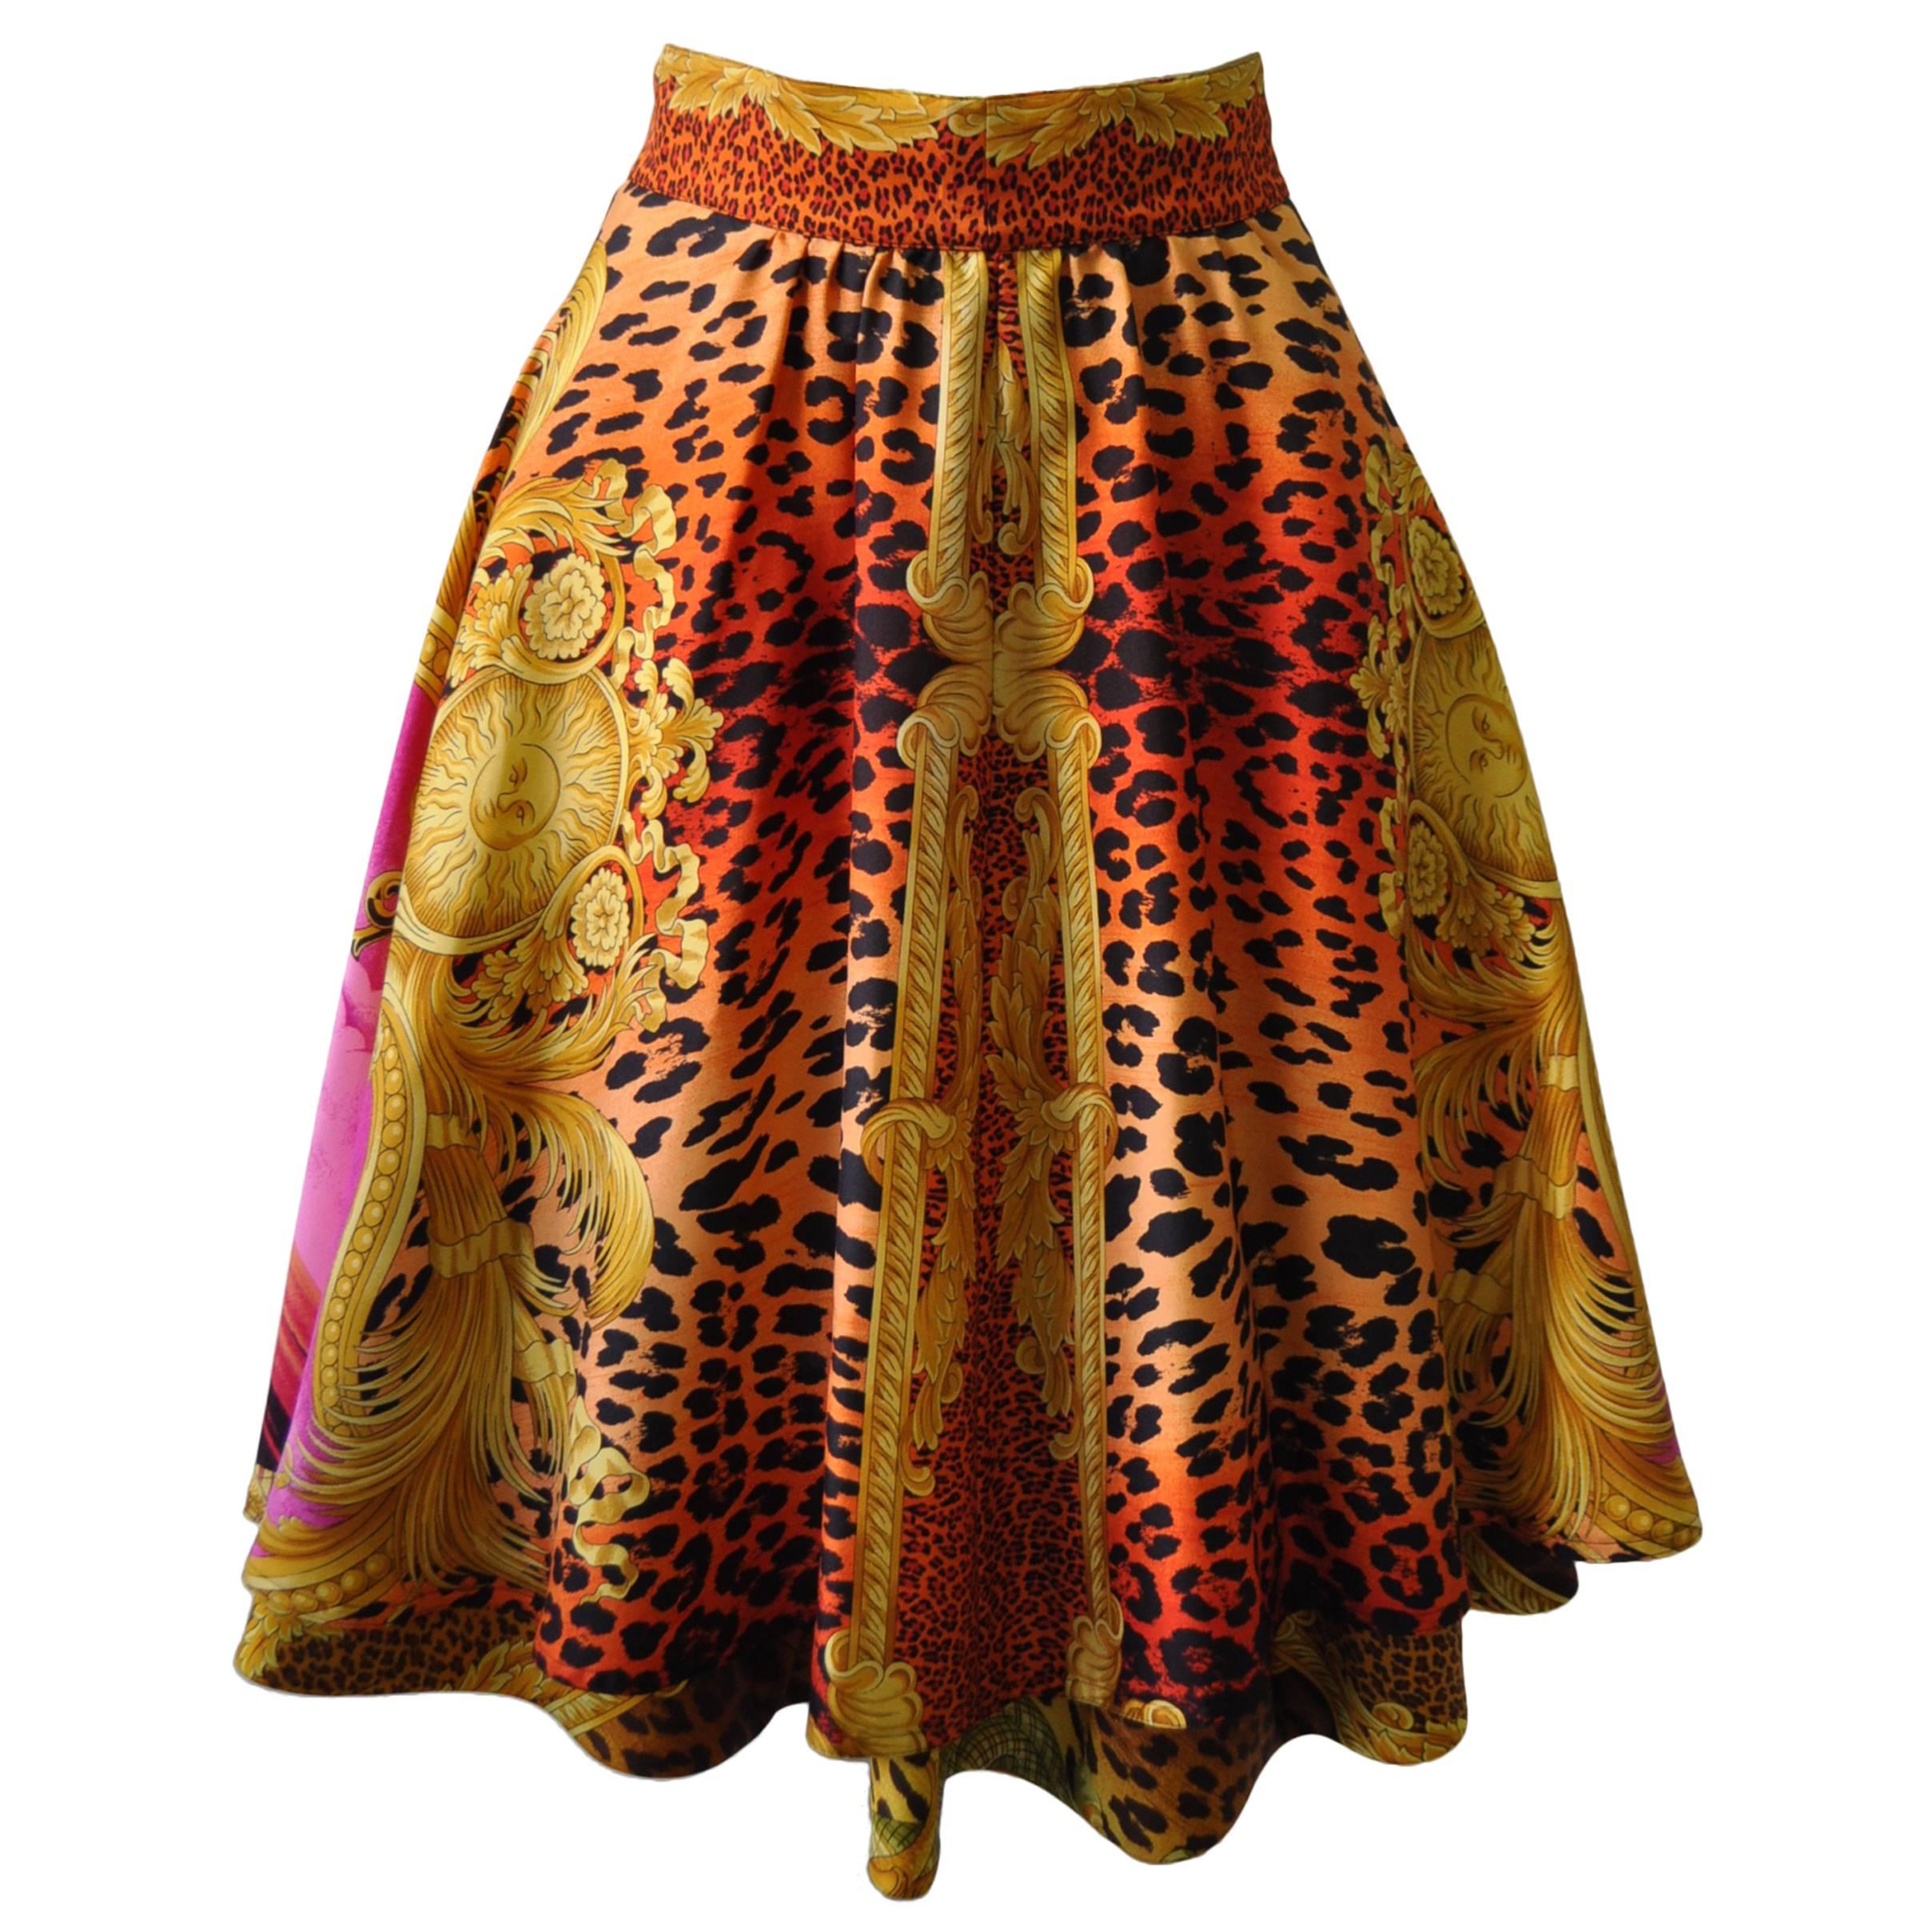 Quintessential Gianni Versace Couture "Miami" Silk Skirt For Sale